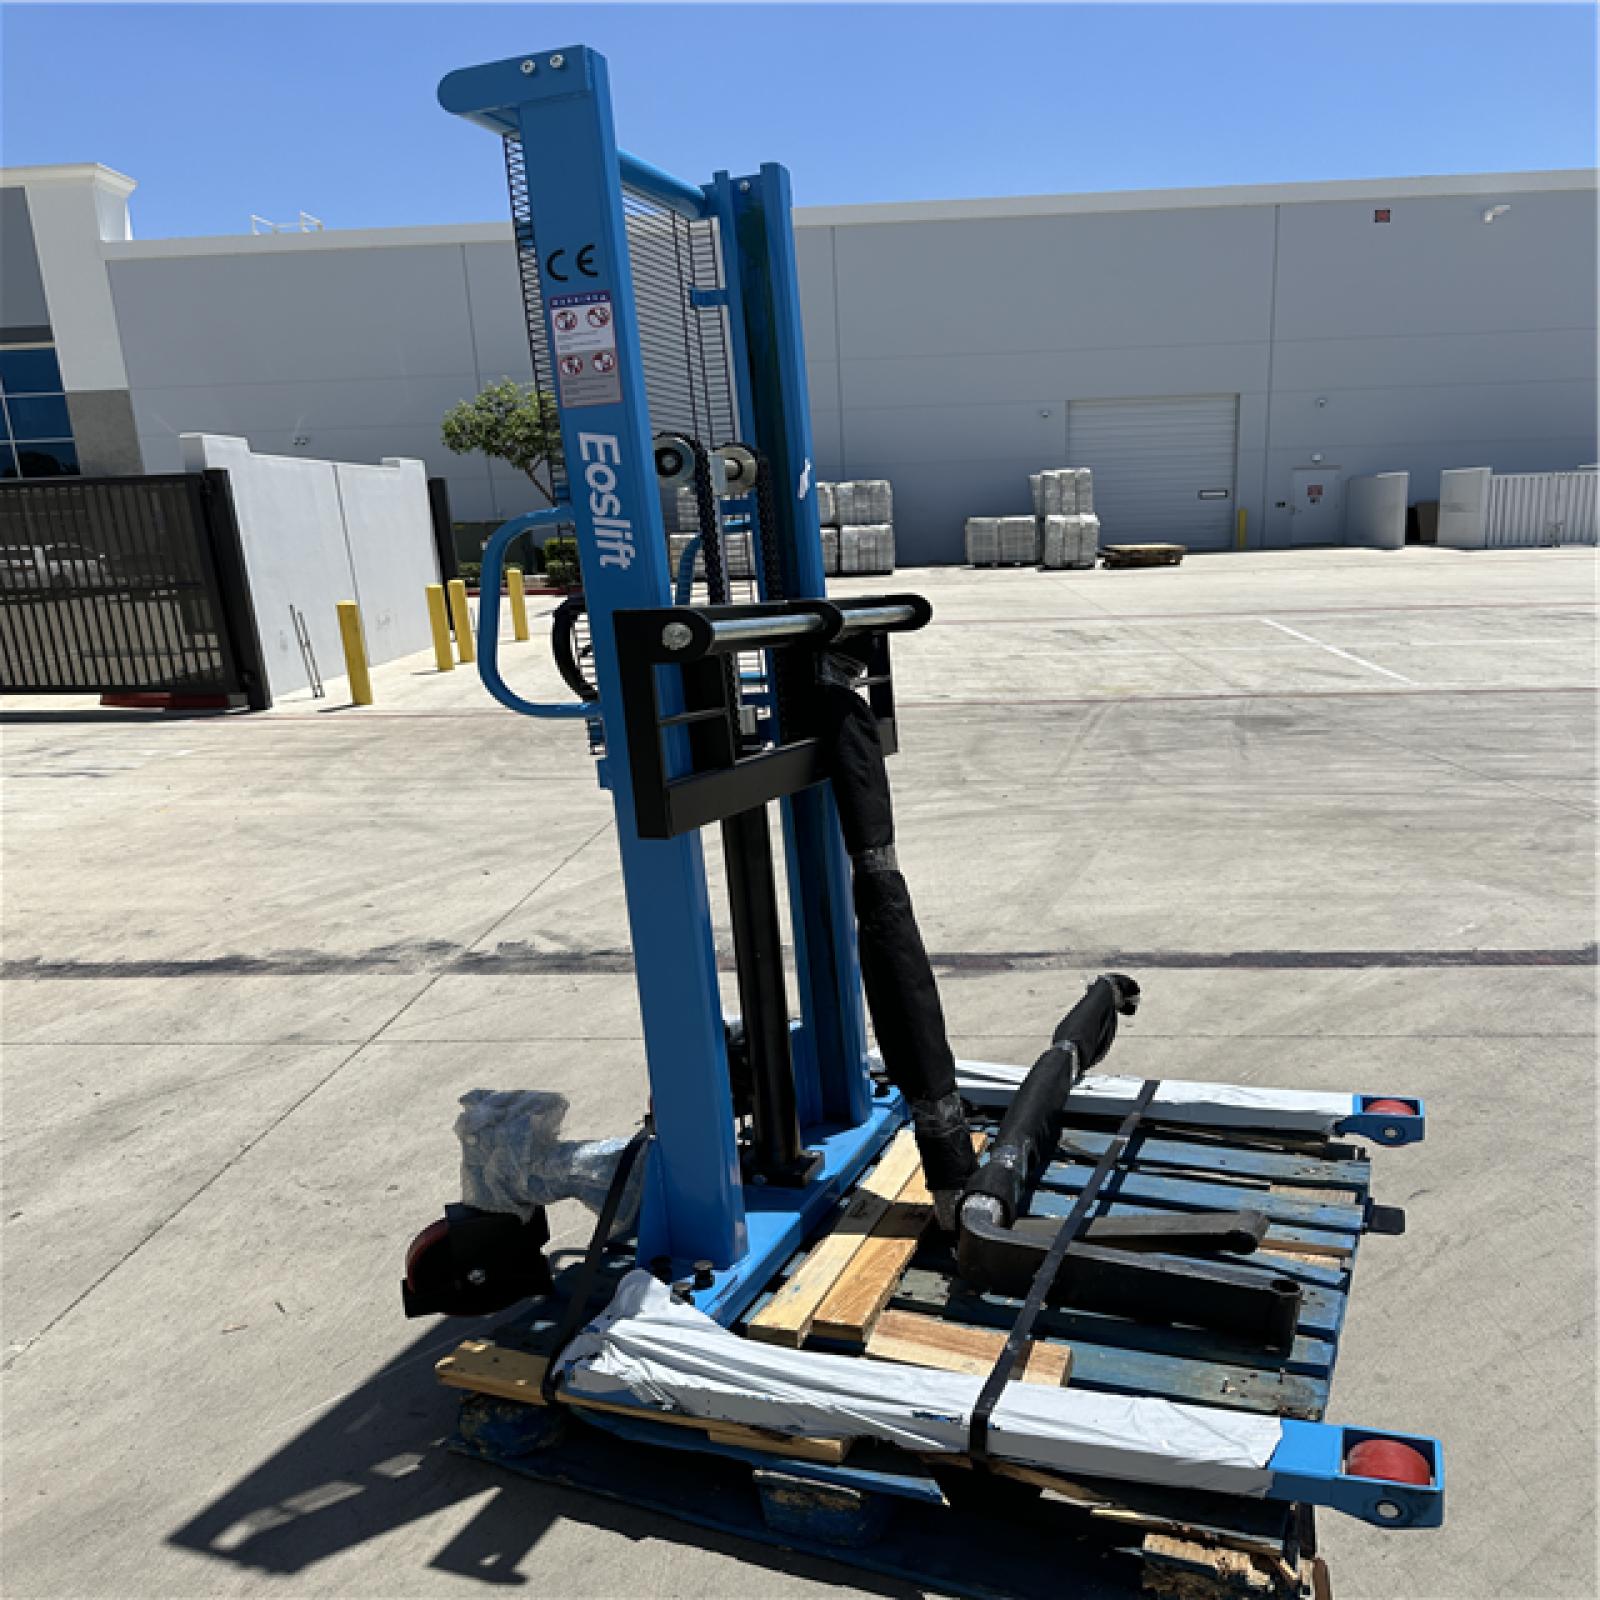 California AS-IS EOS lift Hand Stacker Model H10, Rated Capacity 2200 LBS, Max Lifting Height 63-Appears in Excellent Condition